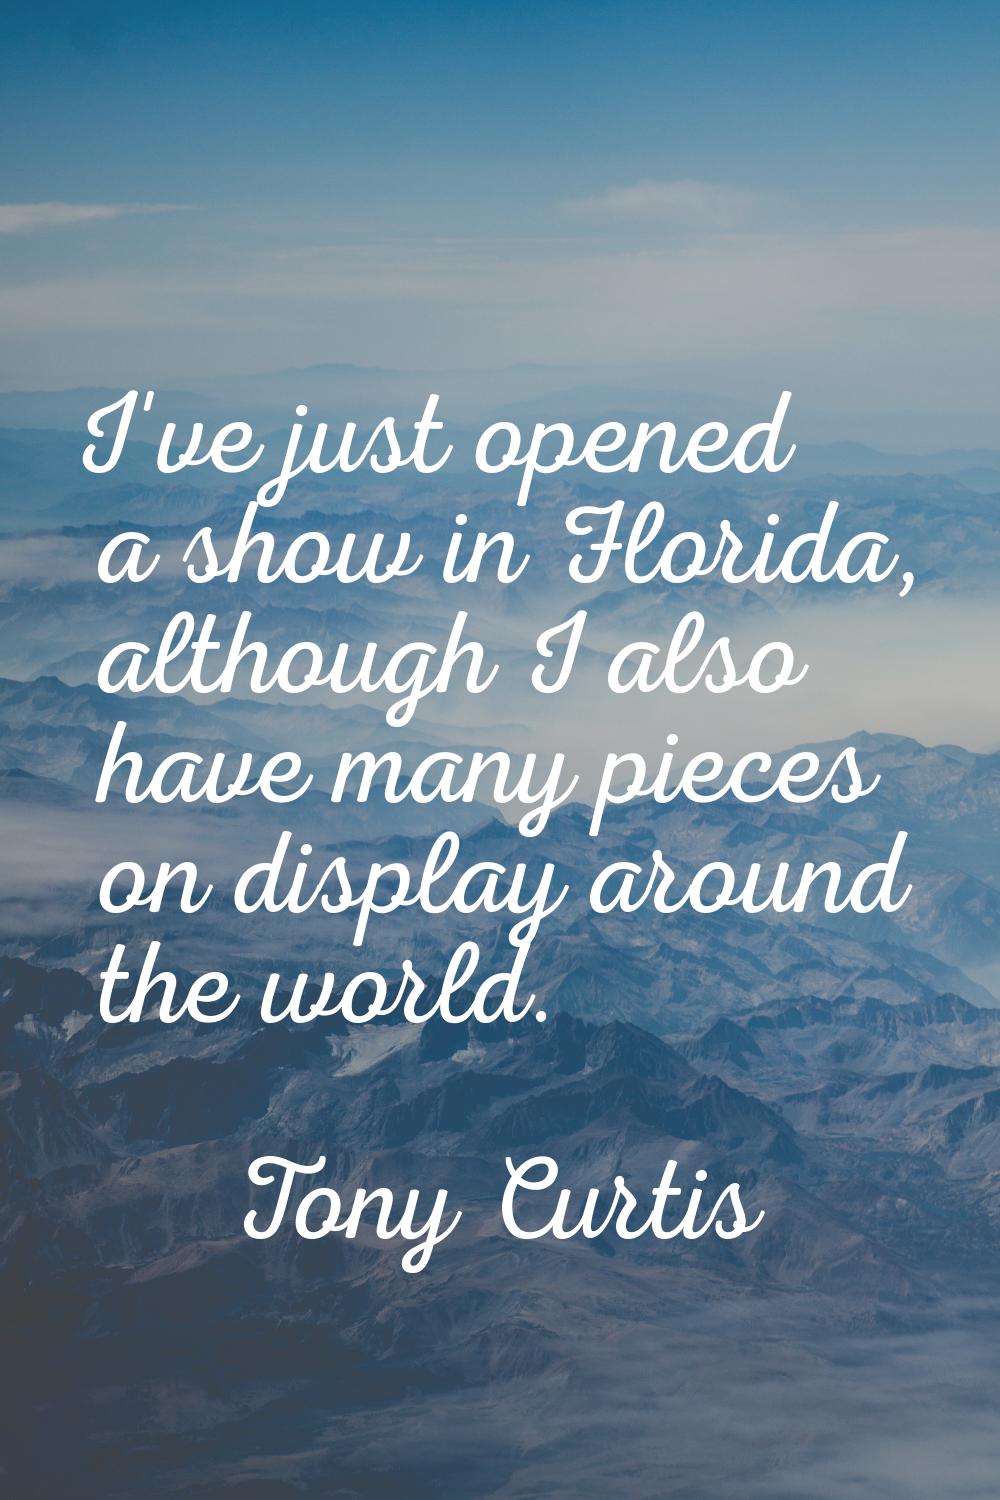 I've just opened a show in Florida, although I also have many pieces on display around the world.